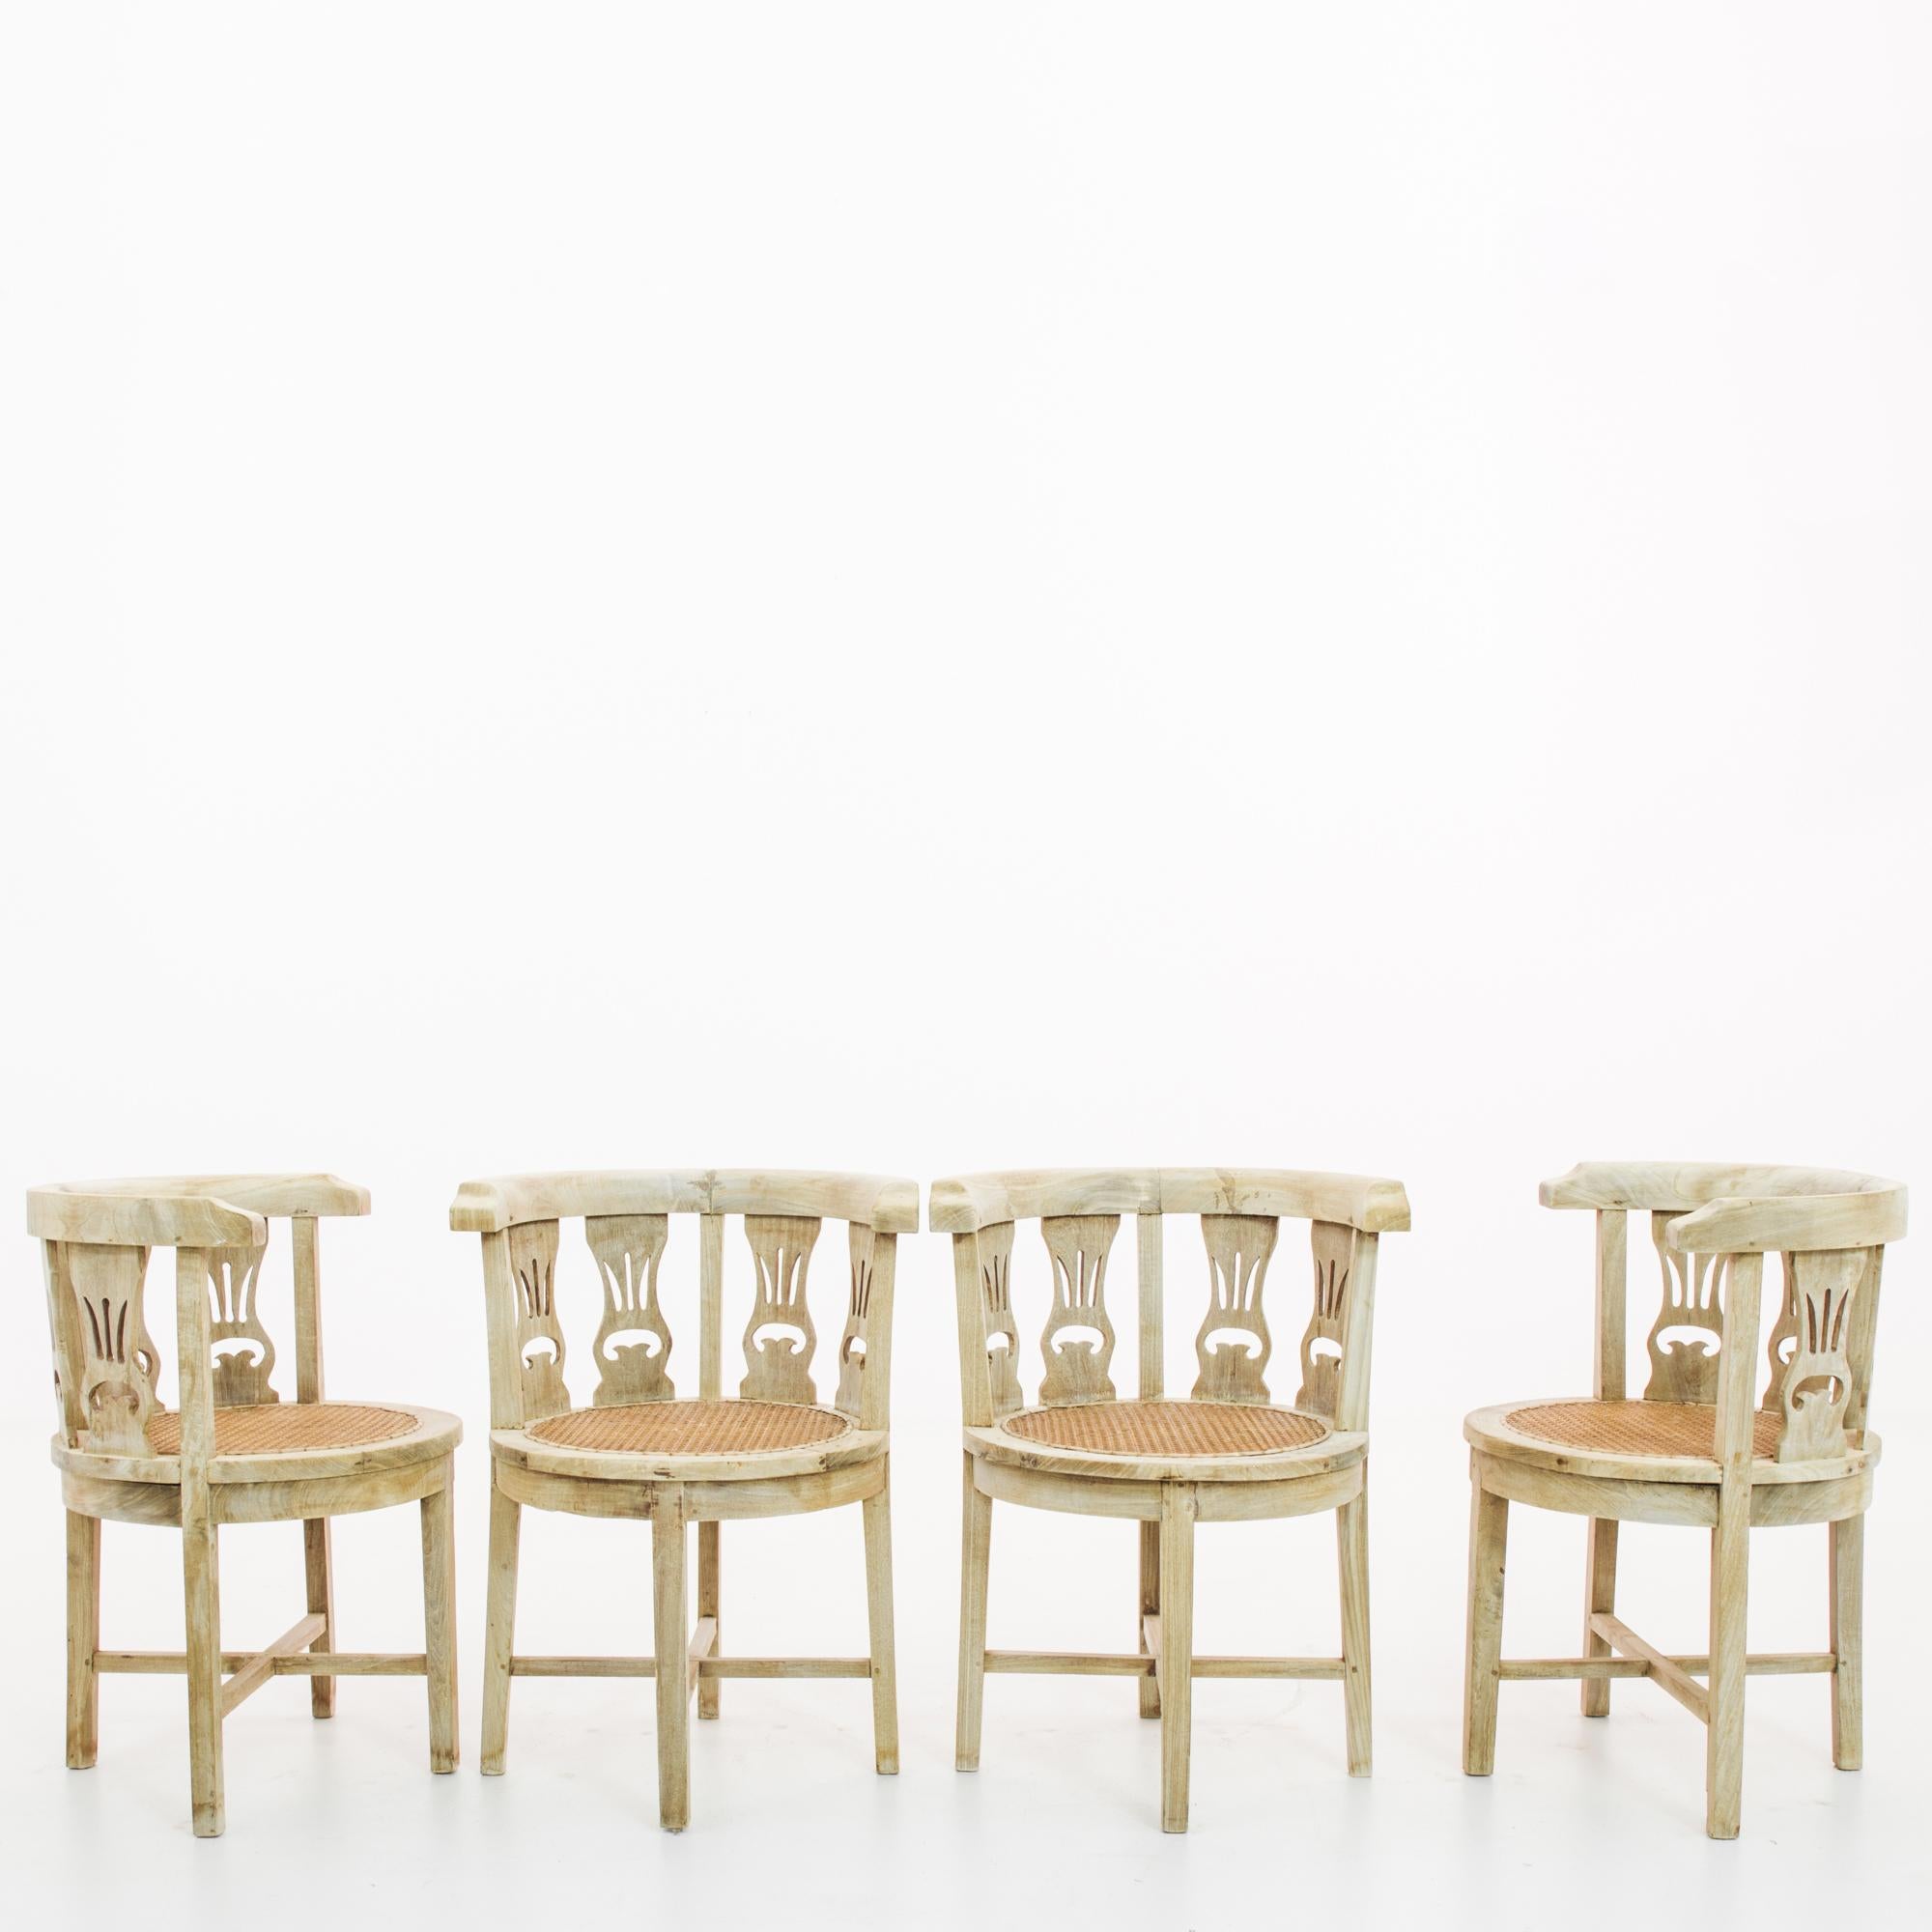 This set of four wooden chairs was made in France, circa 1920. They feature circular seats with curved backrests. Contoured splats with decorative cutouts, reveal the backdrop of the Art Deco era--with a decisive geometry and pleasing rhythm. Four